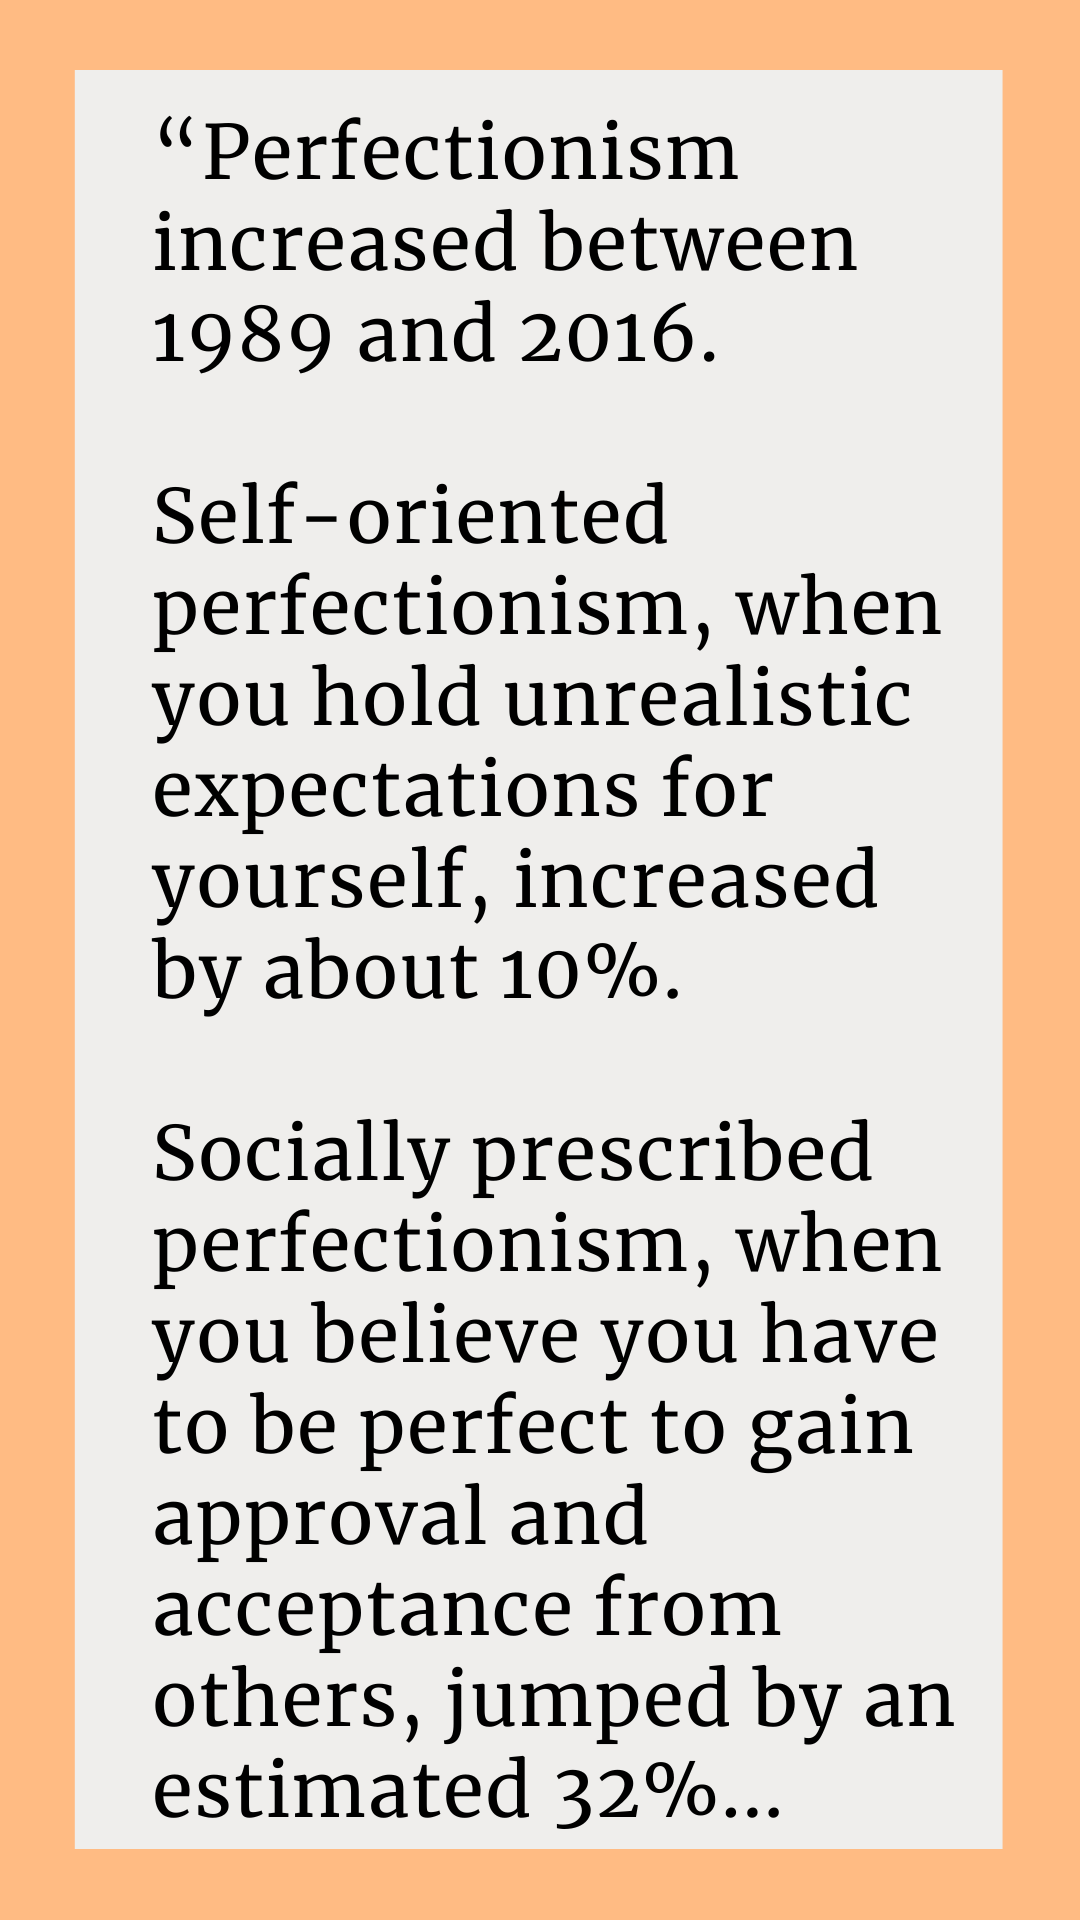 According to Rainseford Stauffer, “Perfectionism increased between 1989 and 2016. Self-oriented perfectionism, when you hold unrealistic expectations for yourself, increased by about 10%. Socially prescribed perfectionism, when you believe you have to be perfect to gain approval and acceptance from others, jumped by an estimated 32%. 